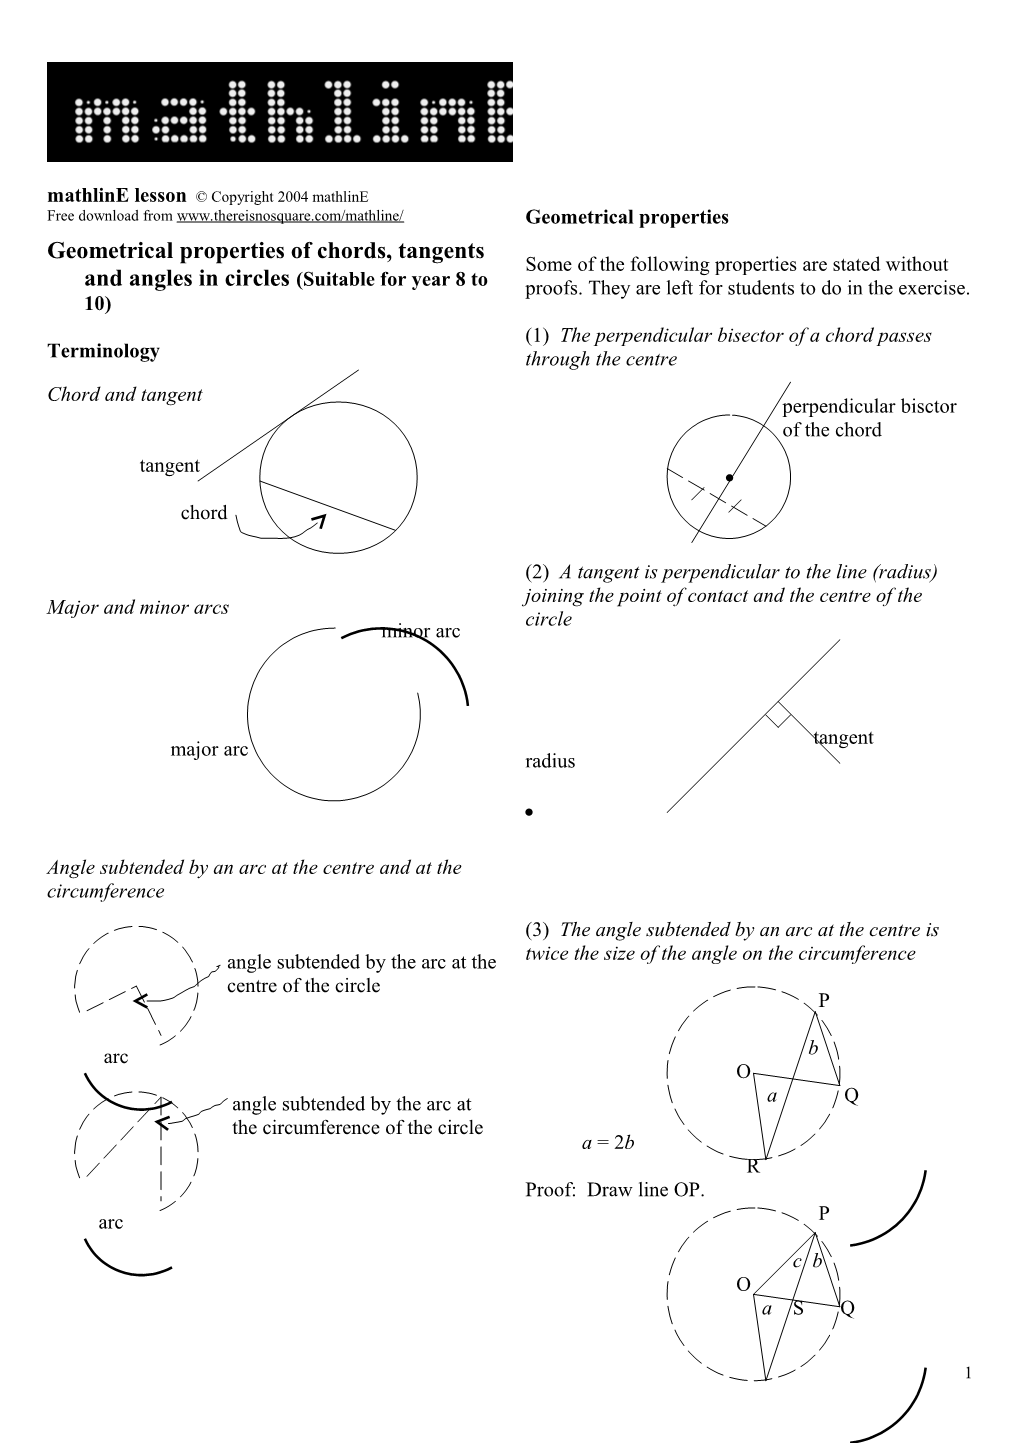 Geometrical Properties of Chords, Tangents and Angles in Circles (Suitable for Year 8 to 10)